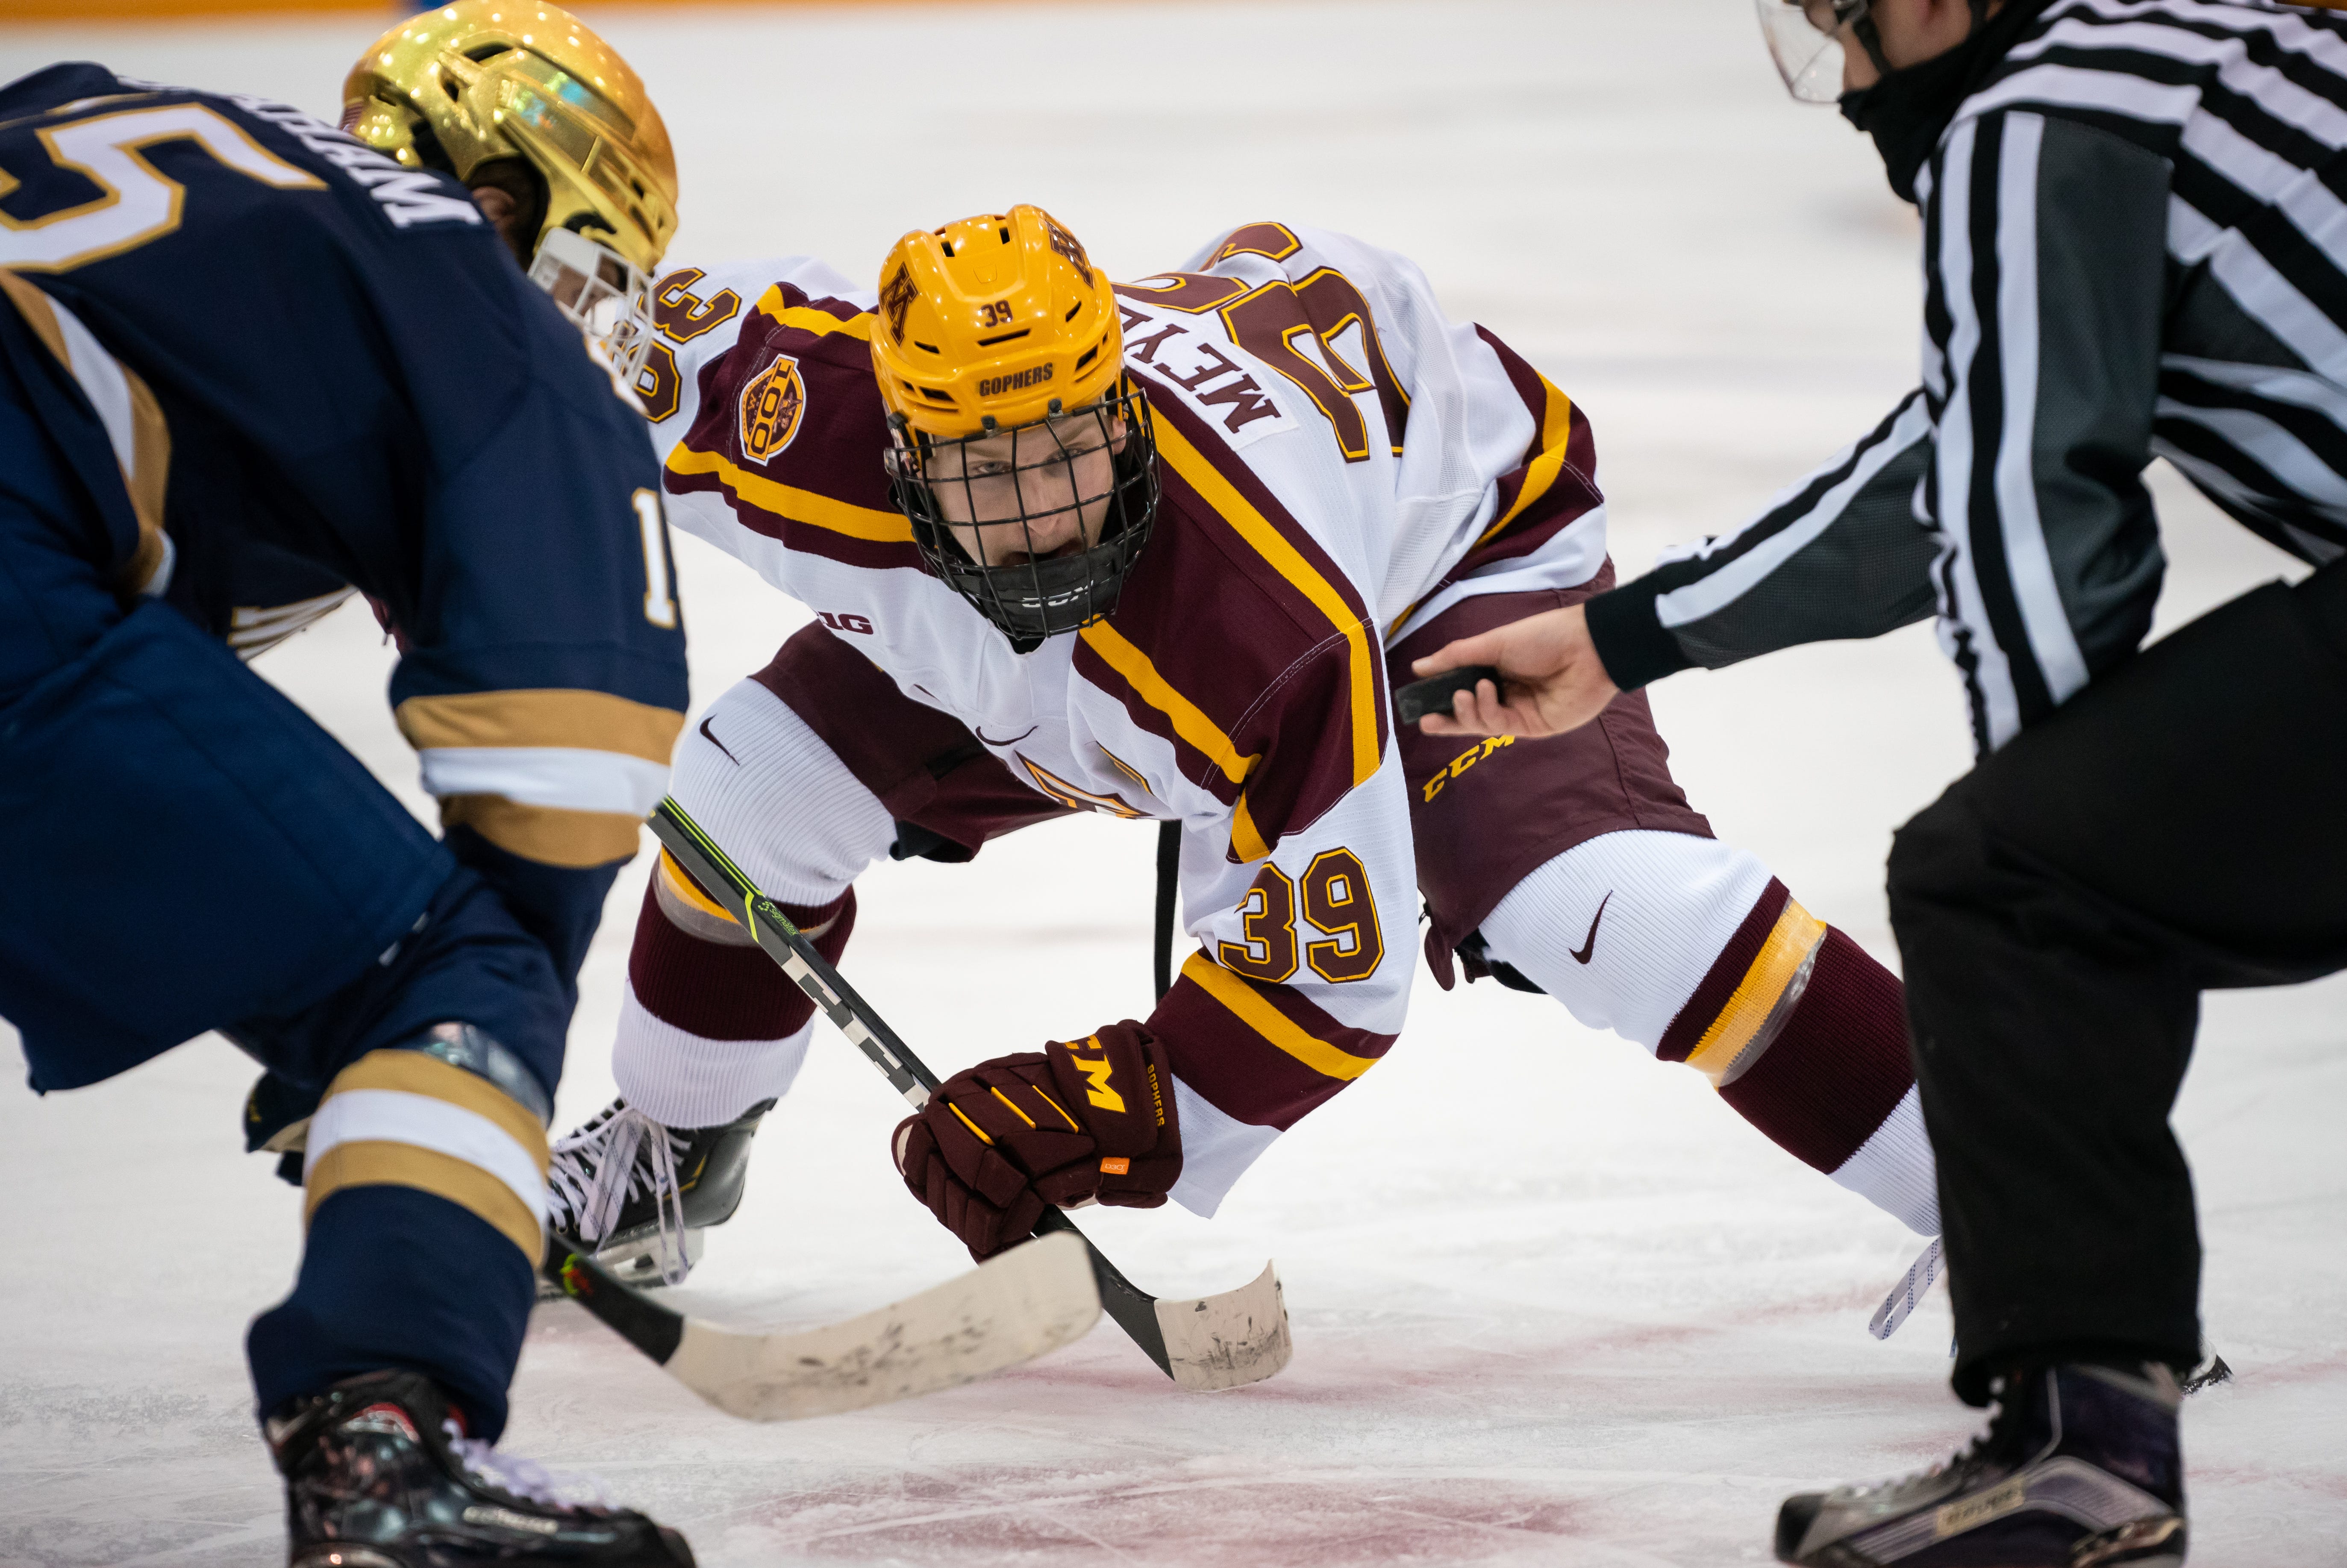 Riese Gaber named captain, four selected as assistants - University of  North Dakota Athletics